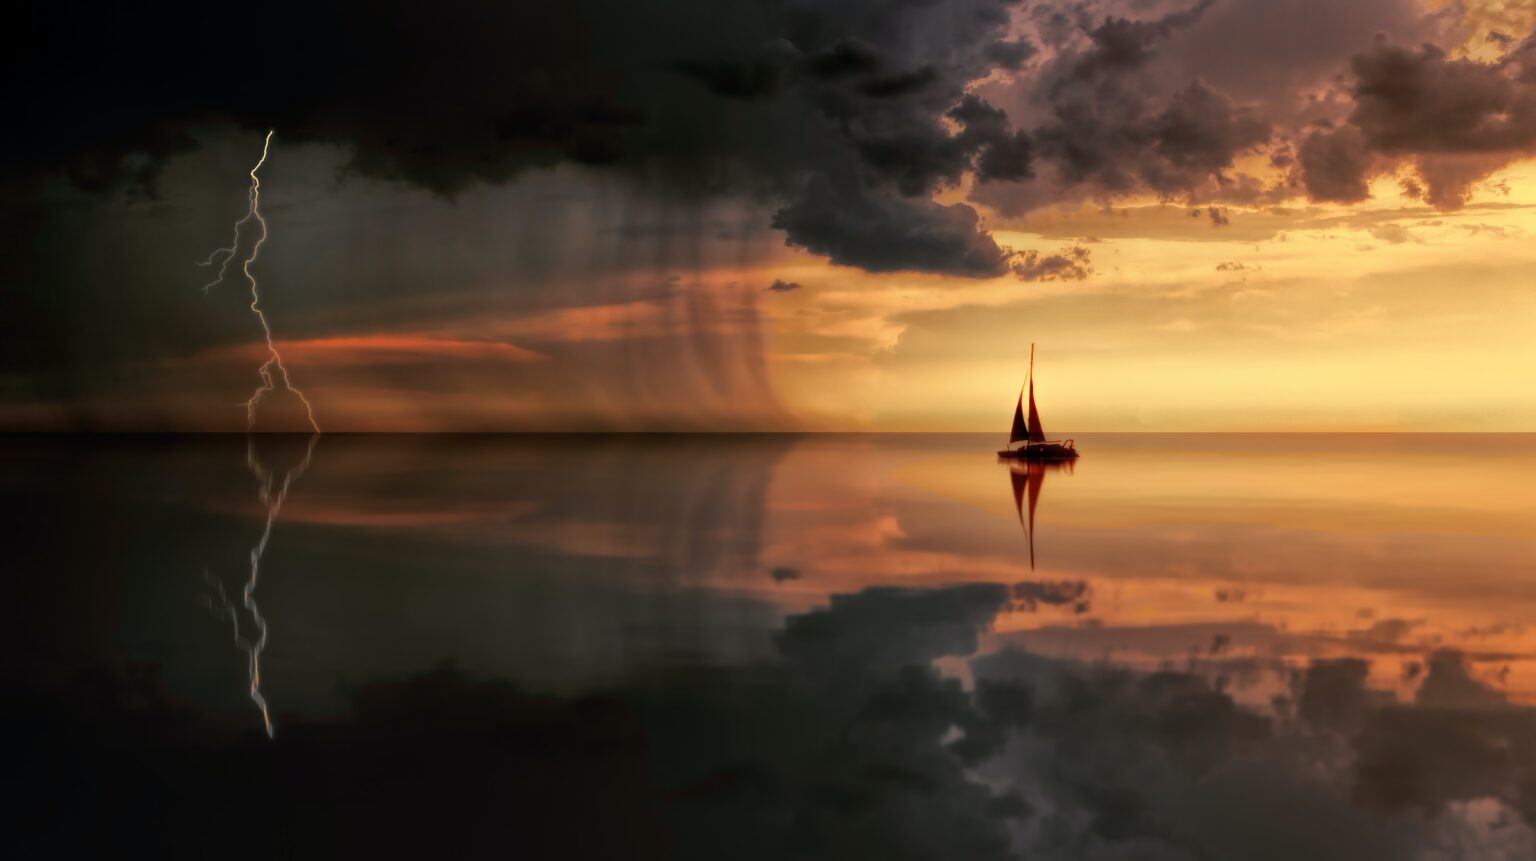 Sailboat on calm water with approaching storm